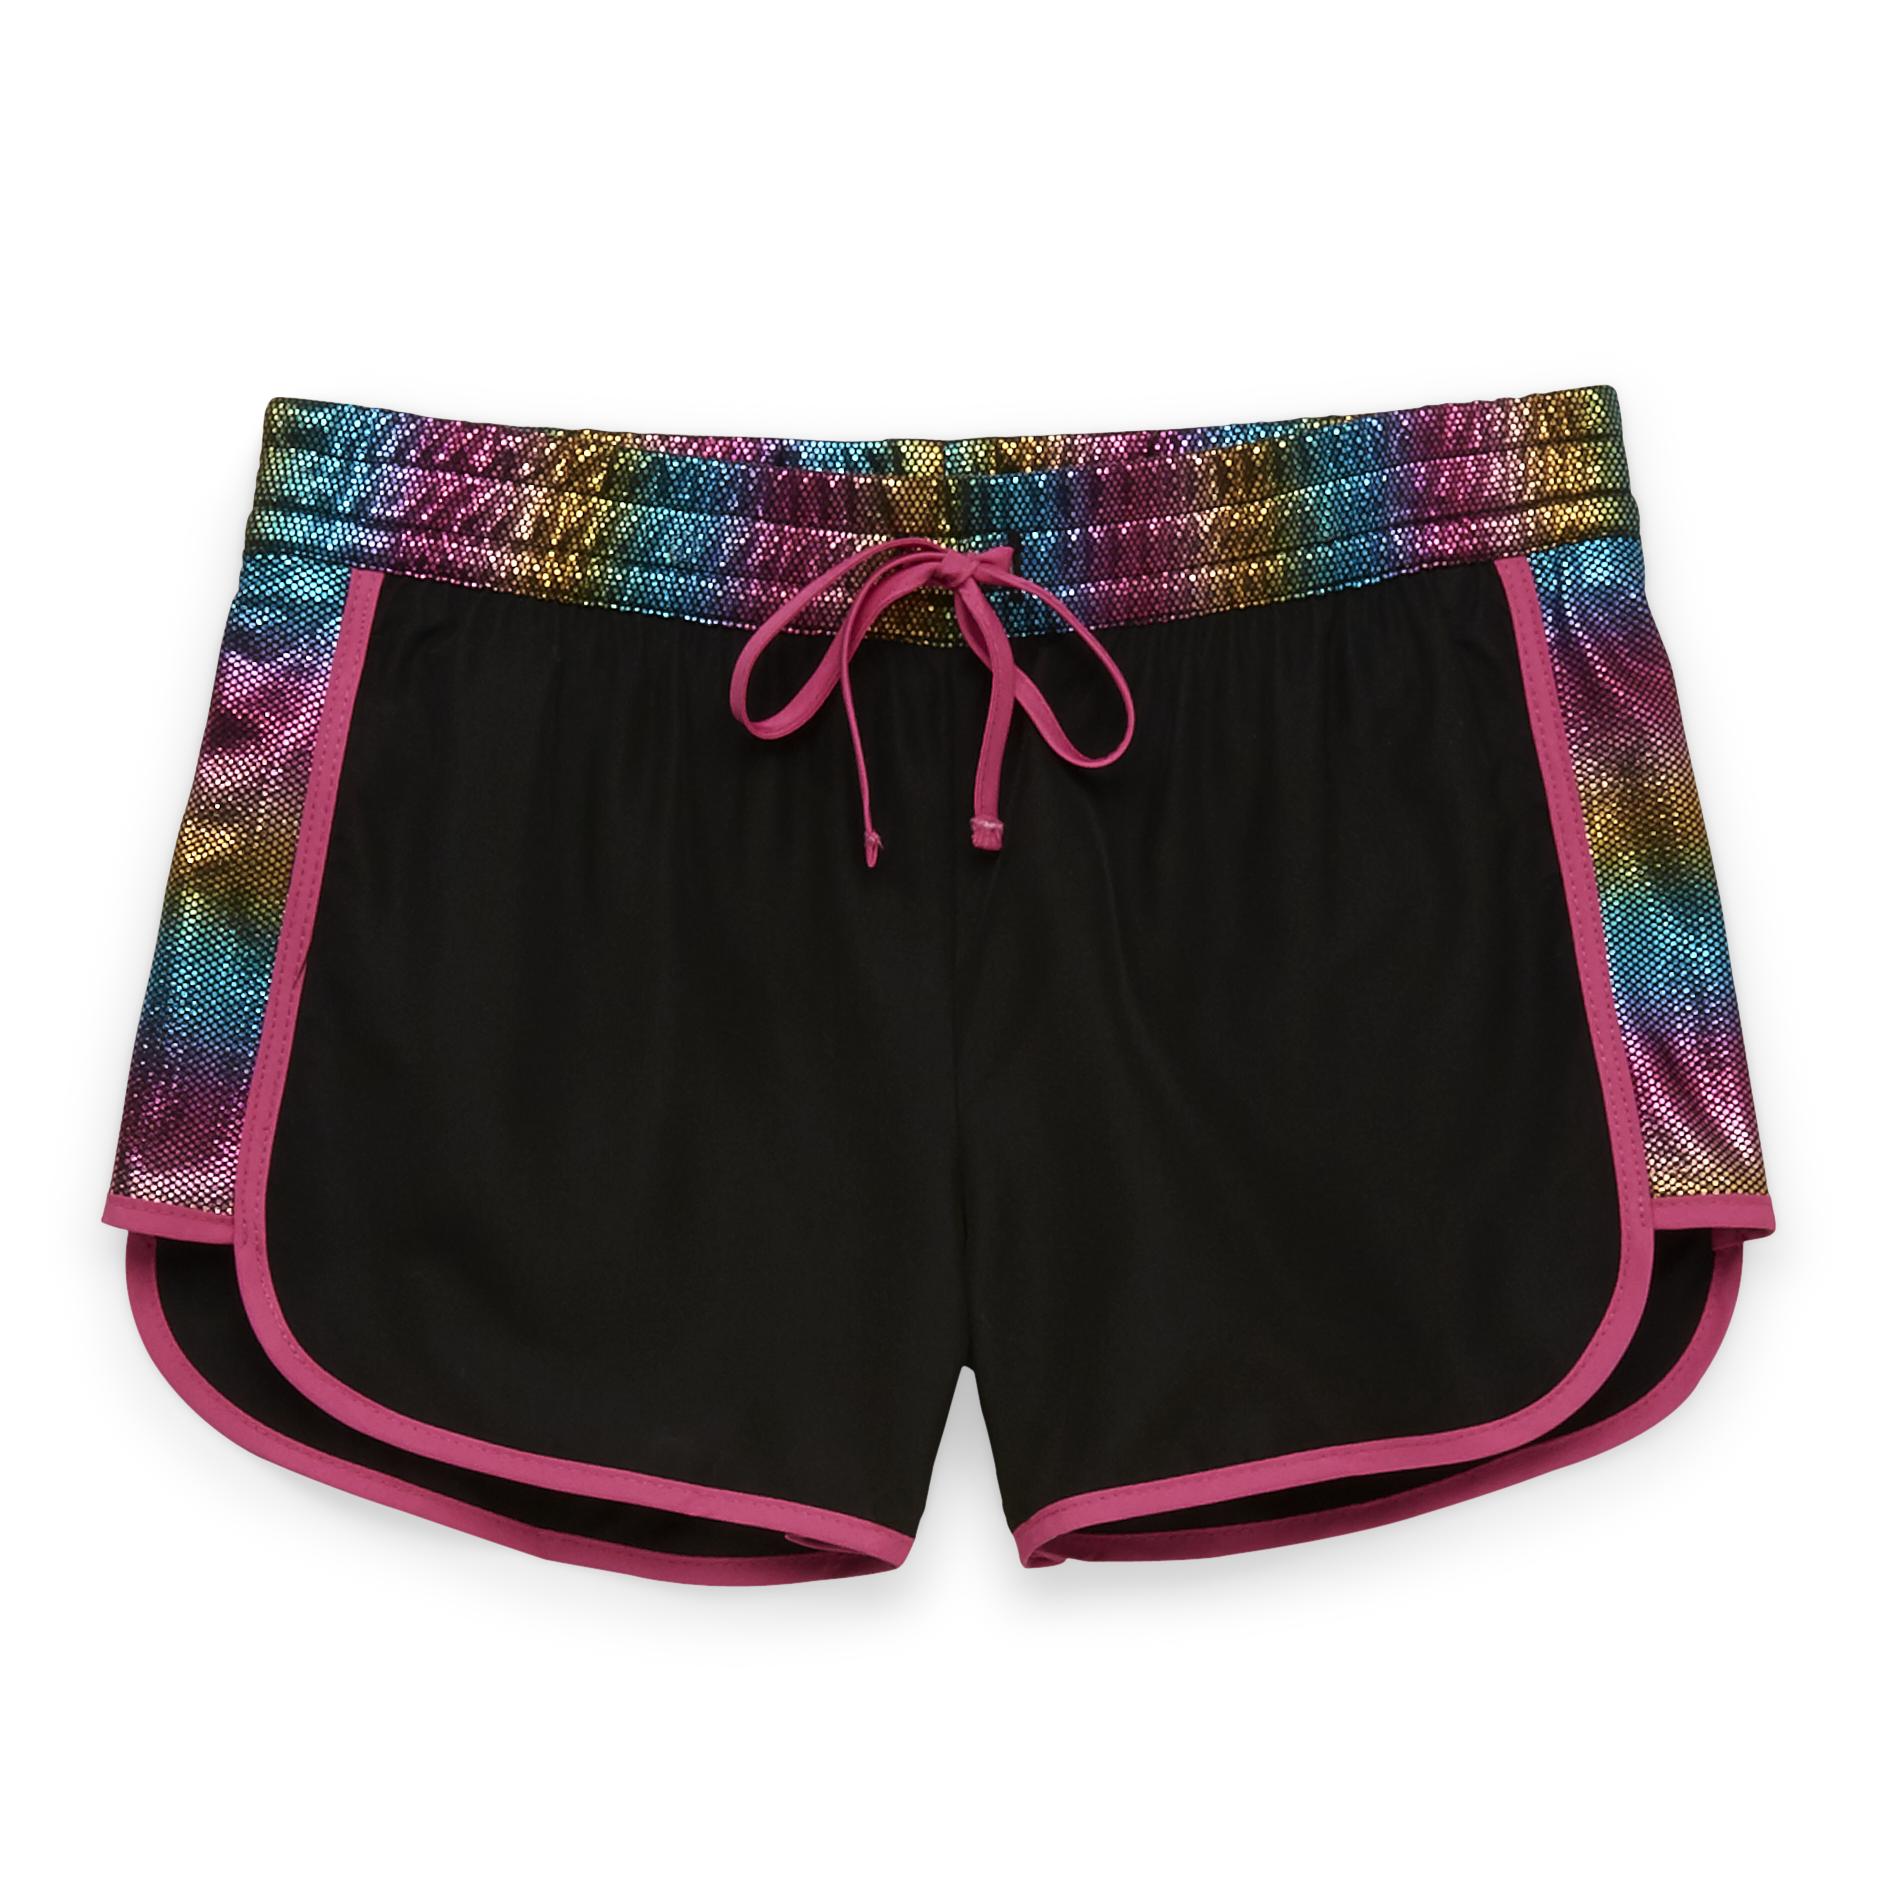 Piper Active Girl's Knit Gym Shorts - Rainbow